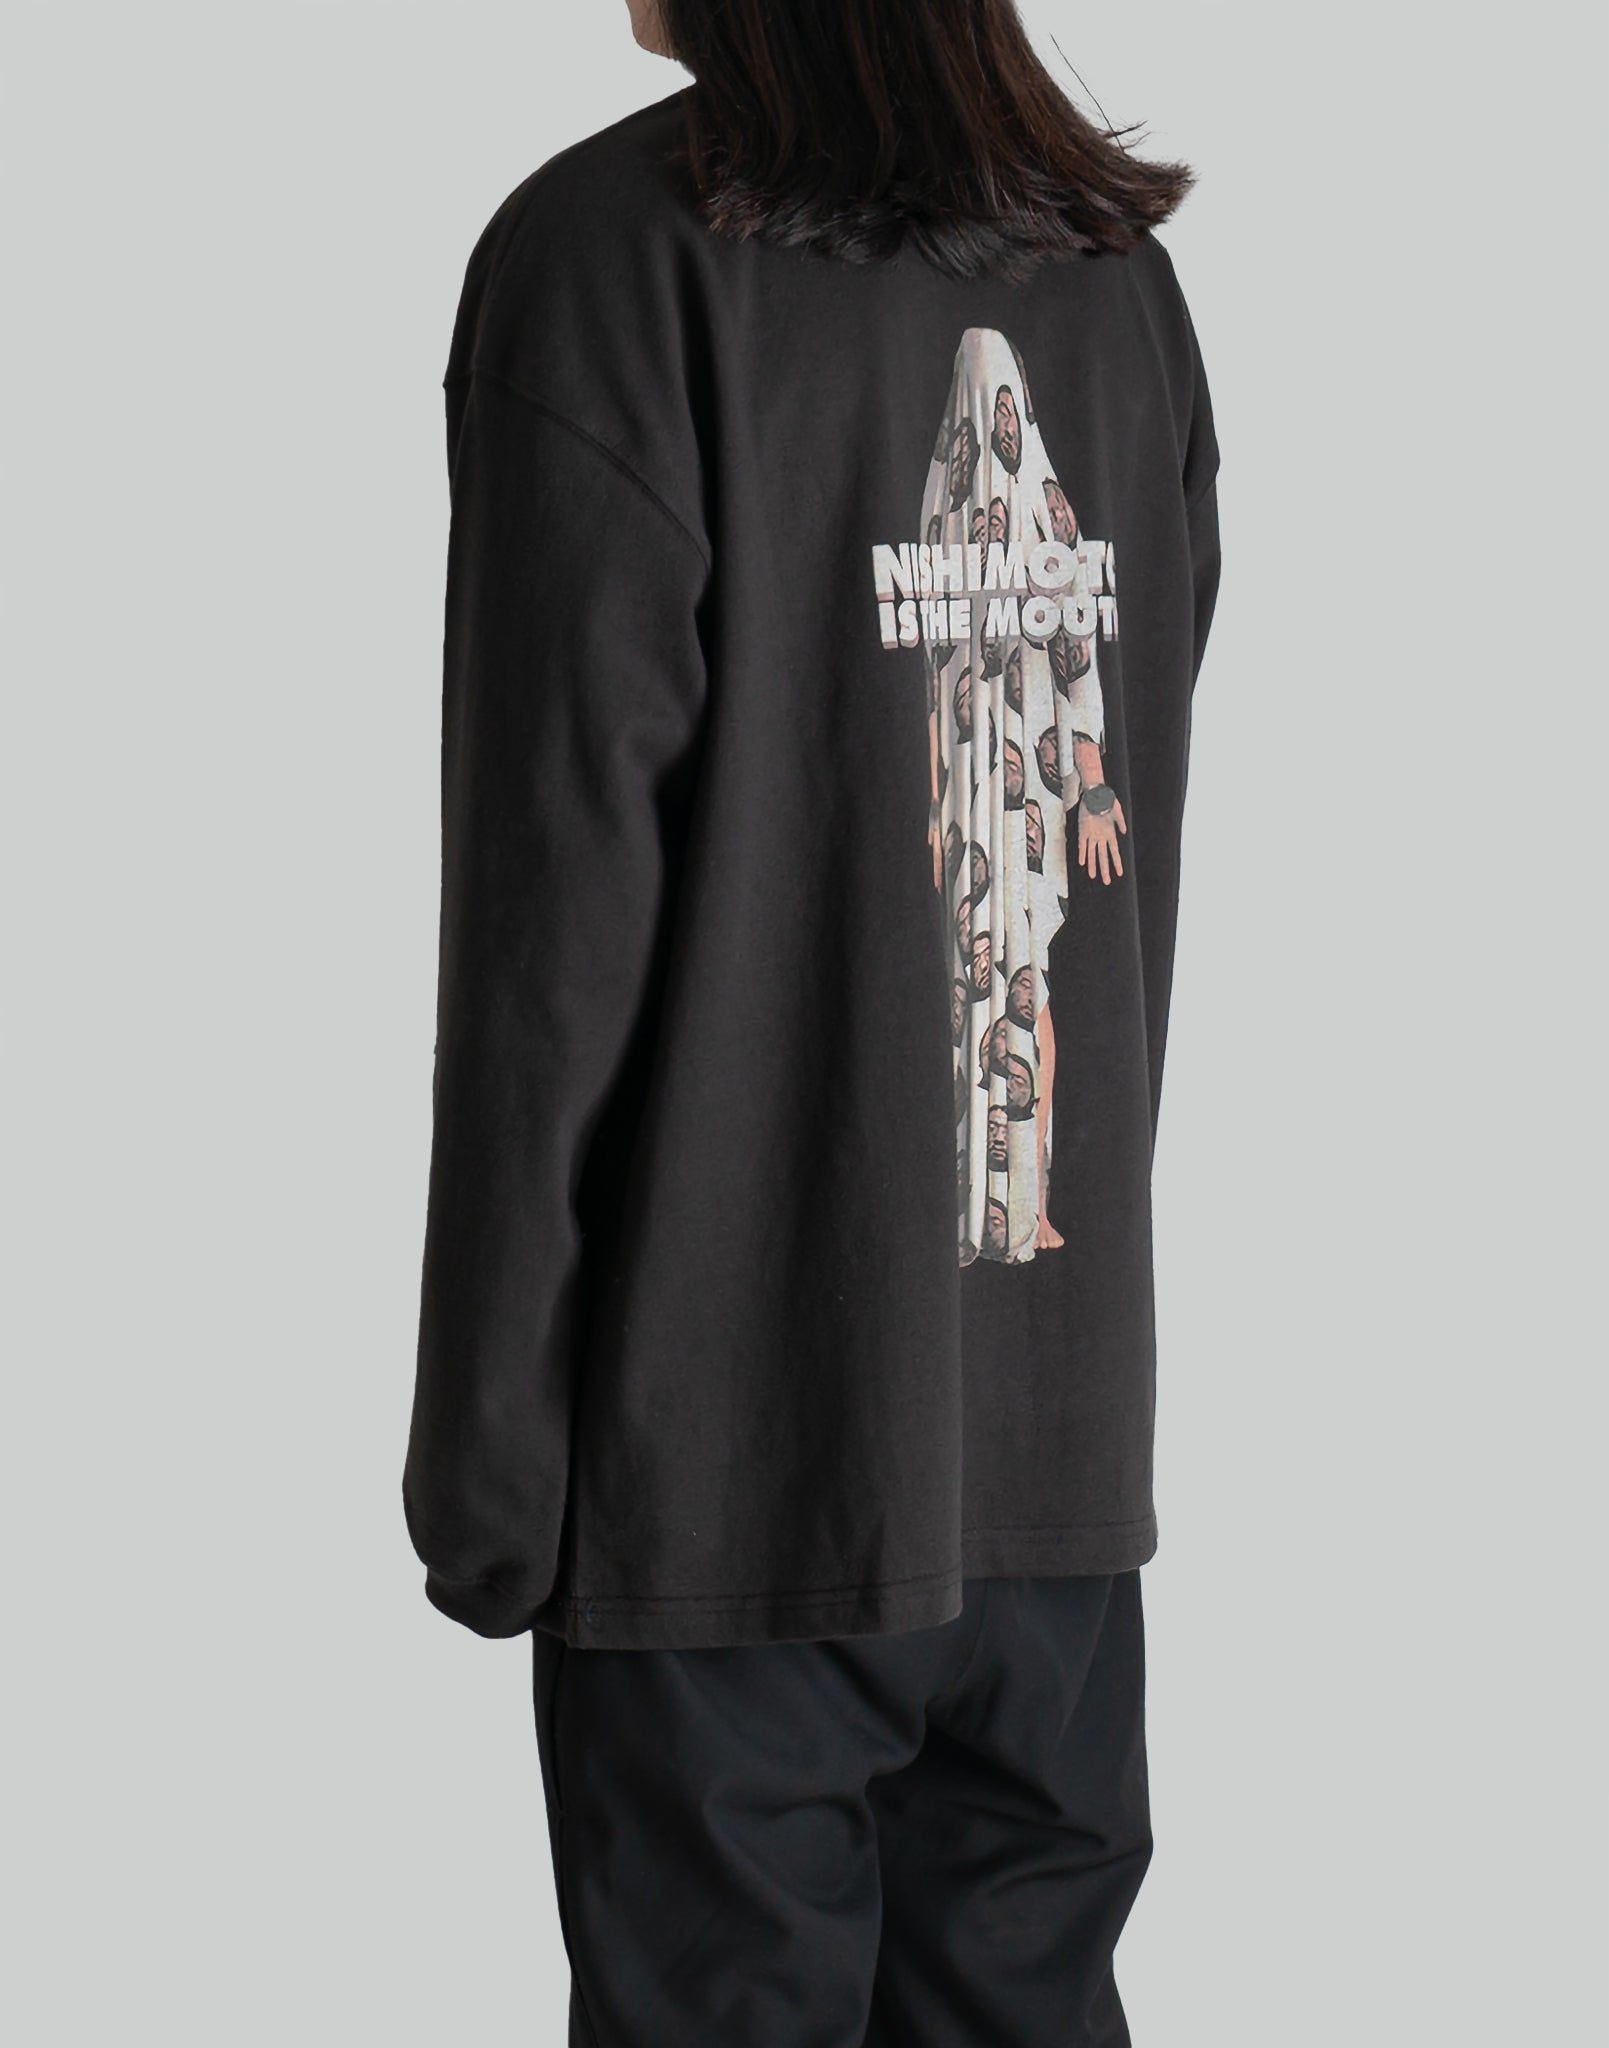 NISHIMOTO IS THE MOUTH BELIEVER FC L/S TEE - 082plus